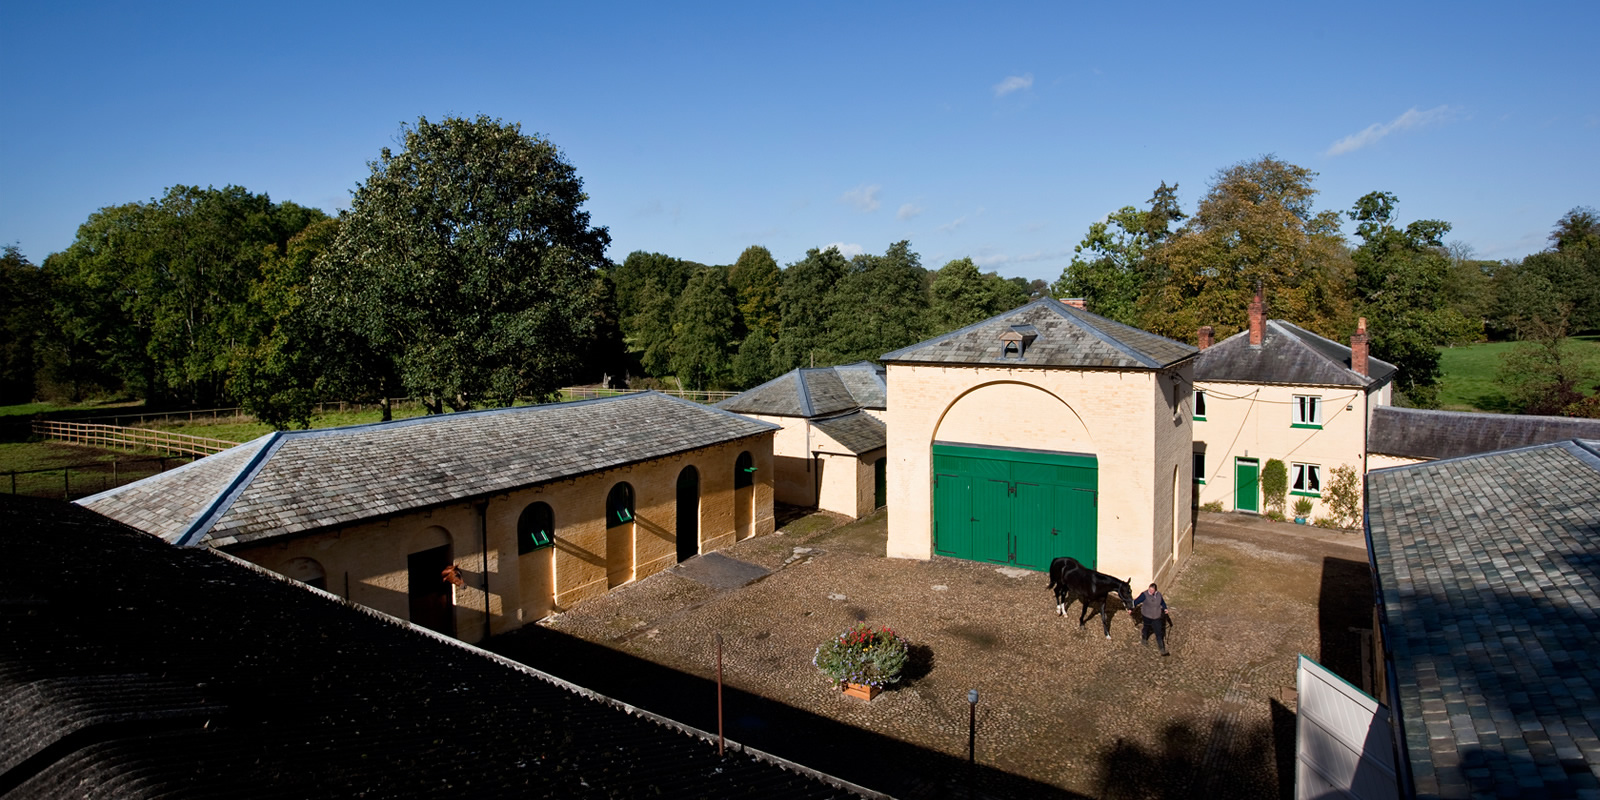 Sir John Soane Stables architecture